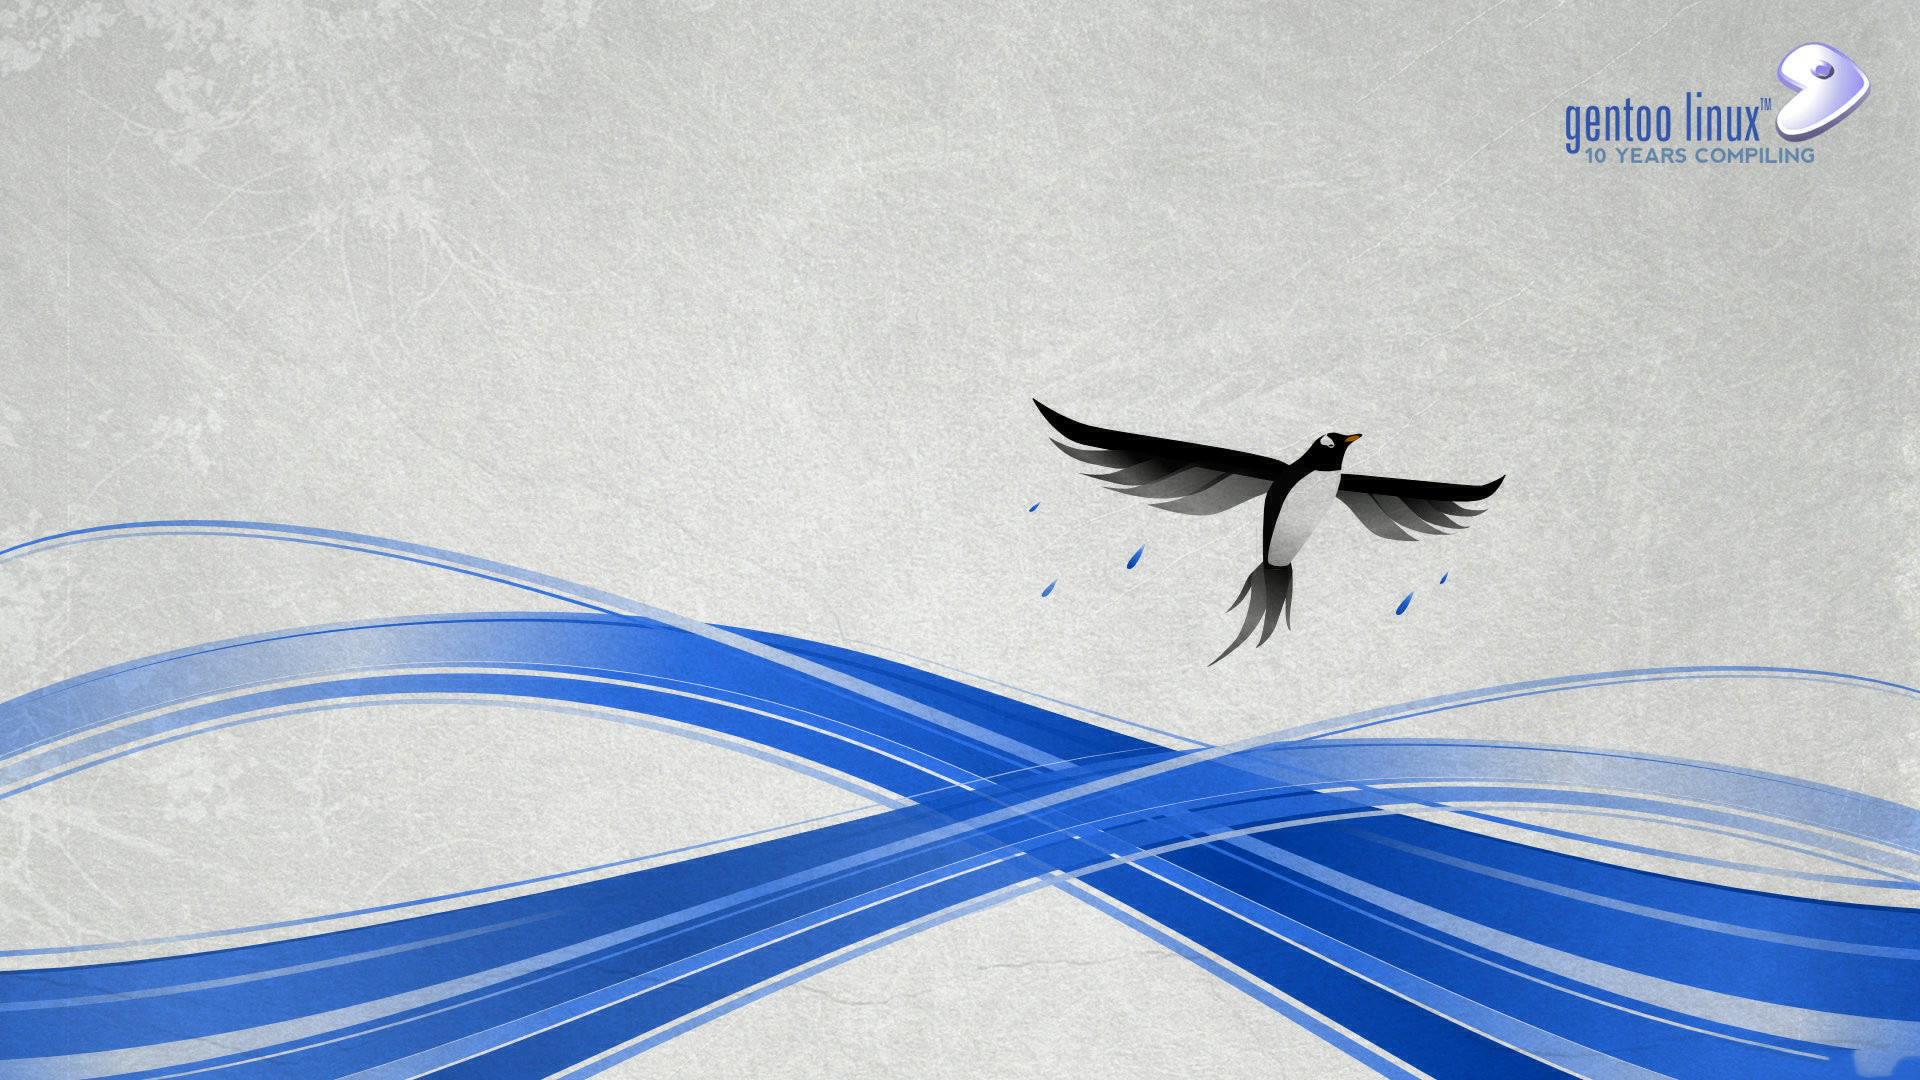 Wallpapers gentoo linux 10 years company on the desktop